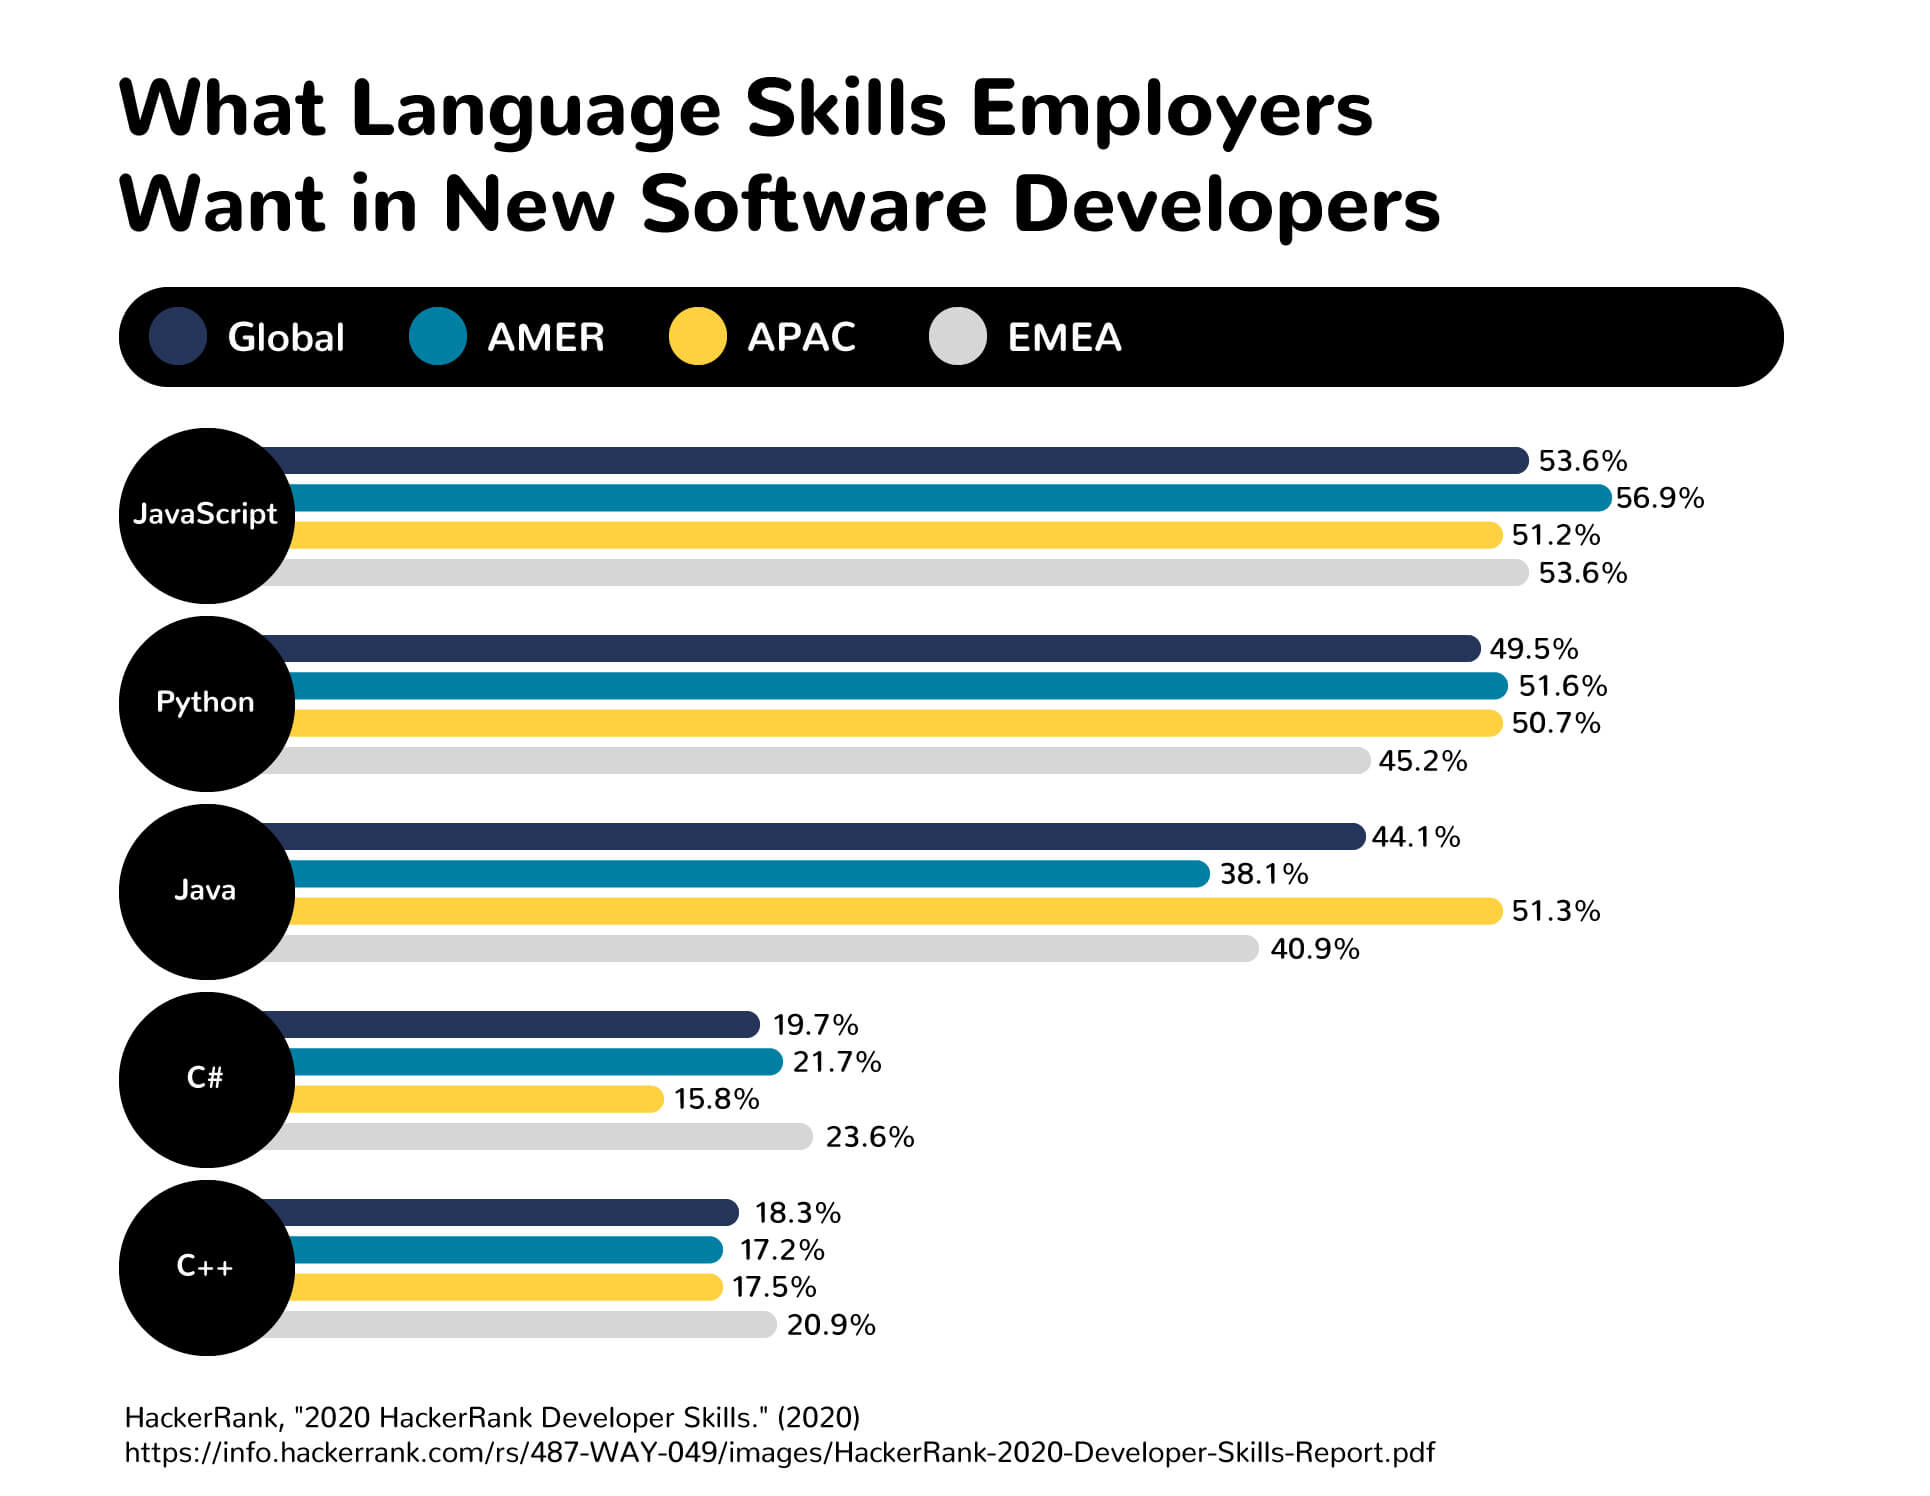 A graph showing what language skills employers want in new software developer hires